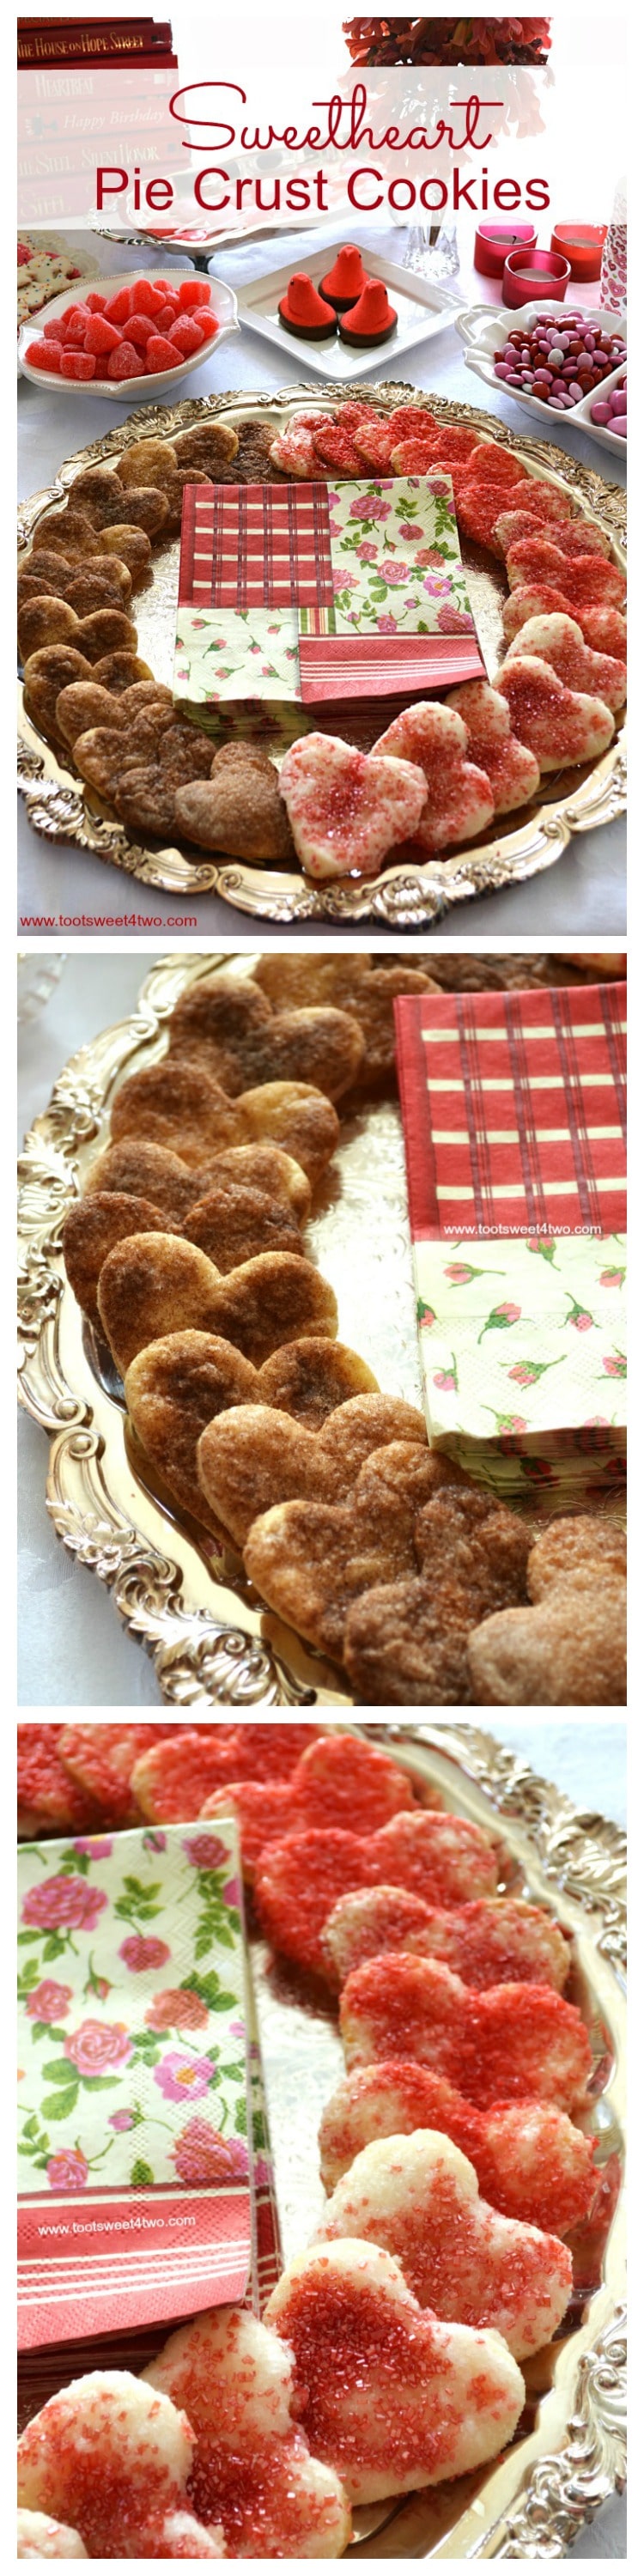 Heart-shaped pie crust cookies made with store-bought dough sprinkled lavishly with sugar and sprinkles.